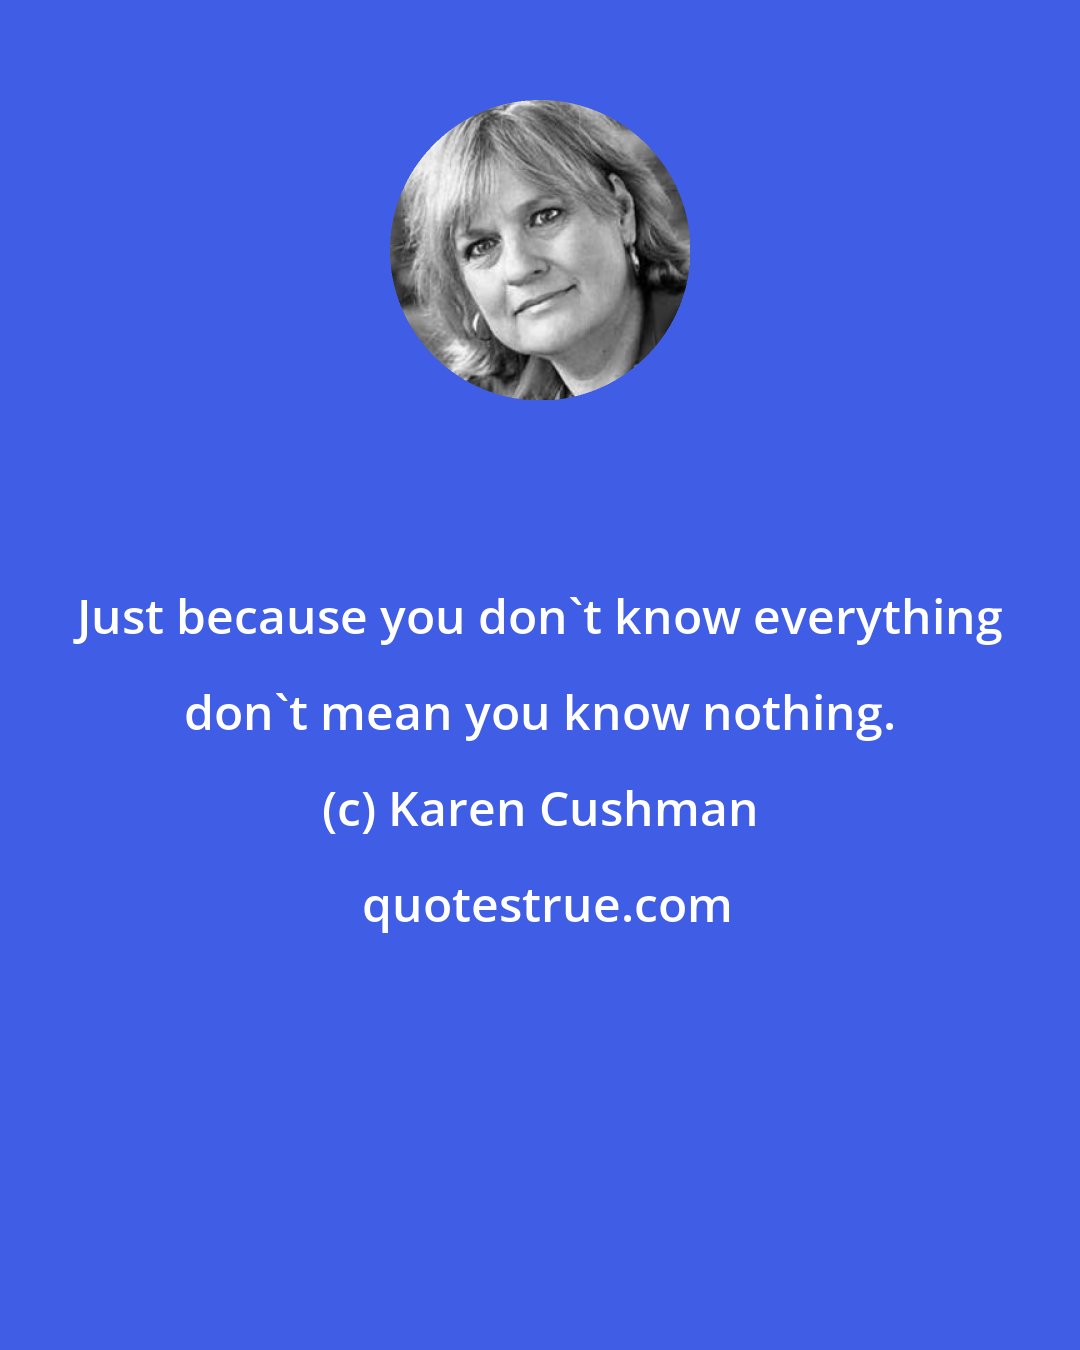 Karen Cushman: Just because you don't know everything don't mean you know nothing.